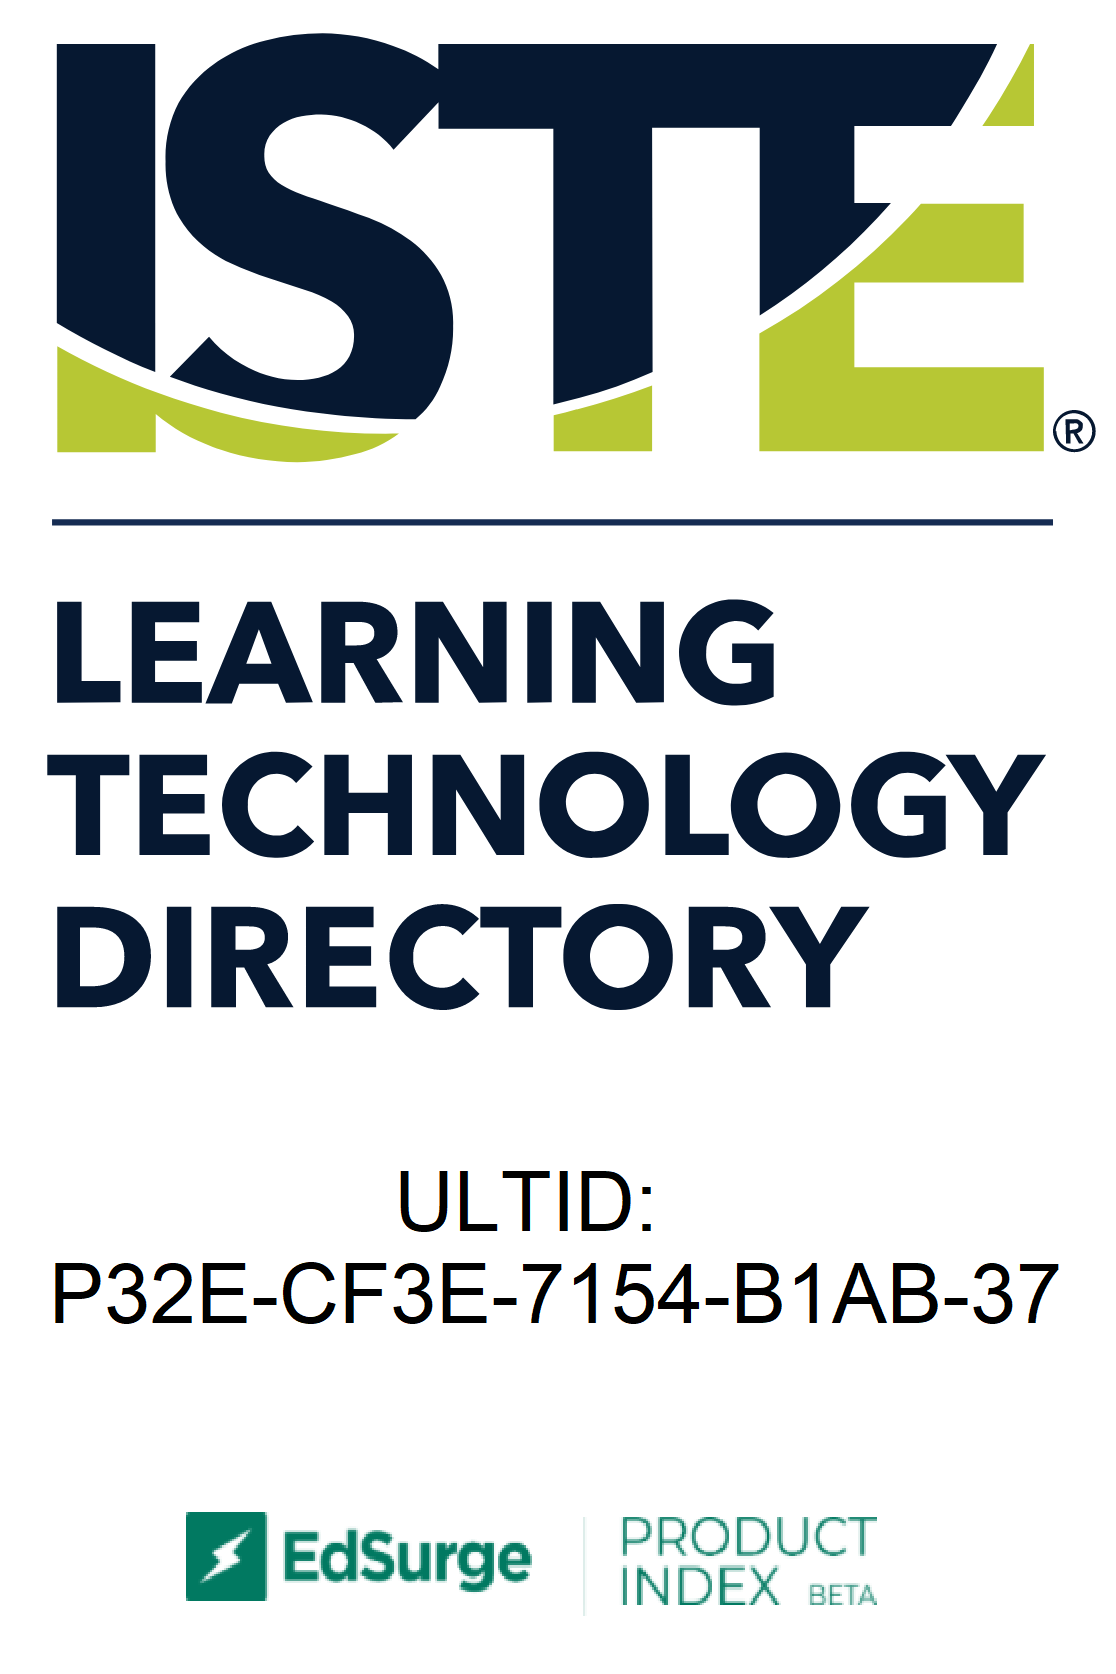 The logos for the ISTE Learning Technology Directory and the EdSurge Product Index